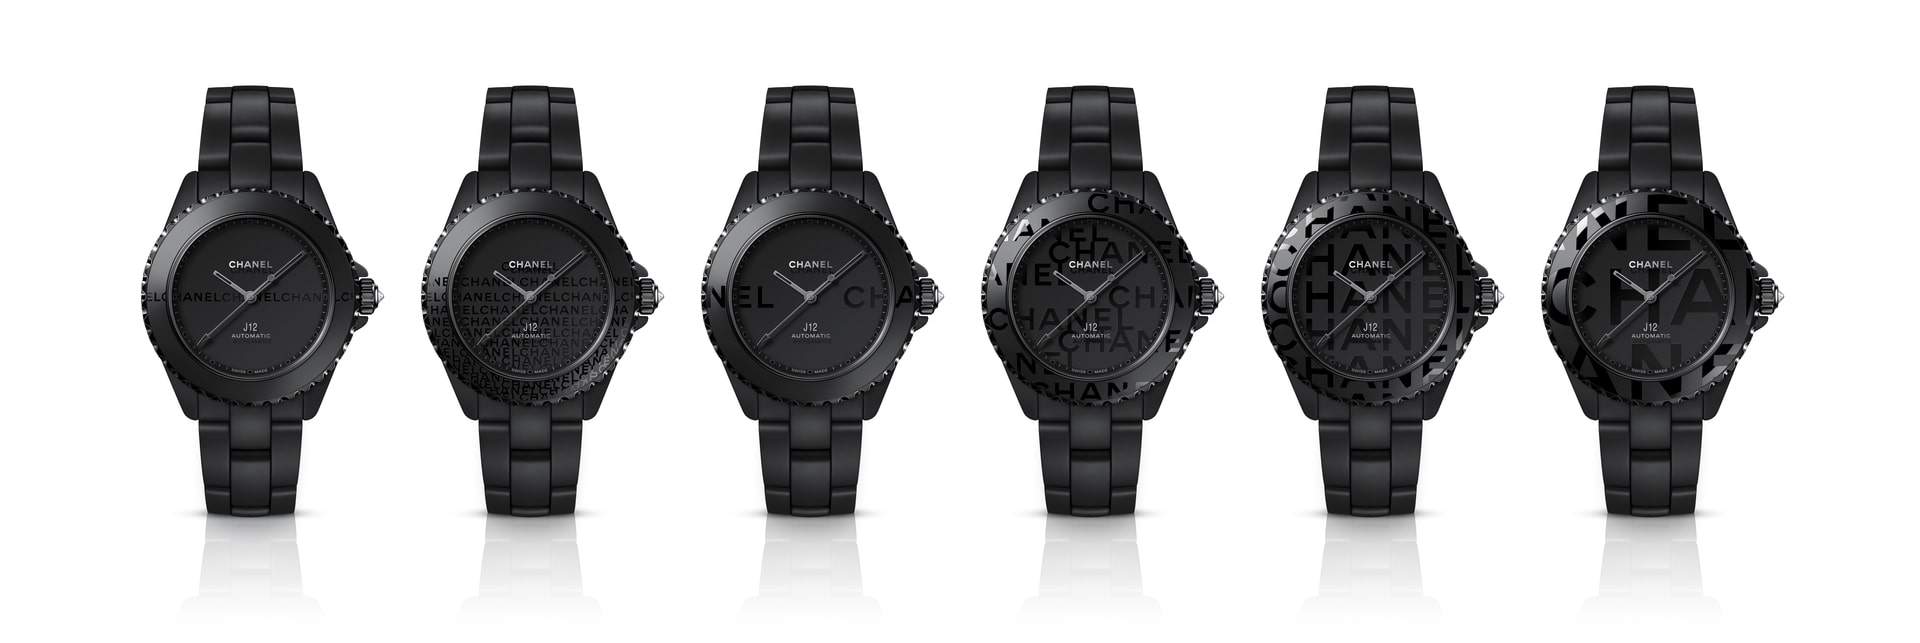 New capsule collection Chanel Wanted was launched at the annual watch fair, among others. Photos: Chanel